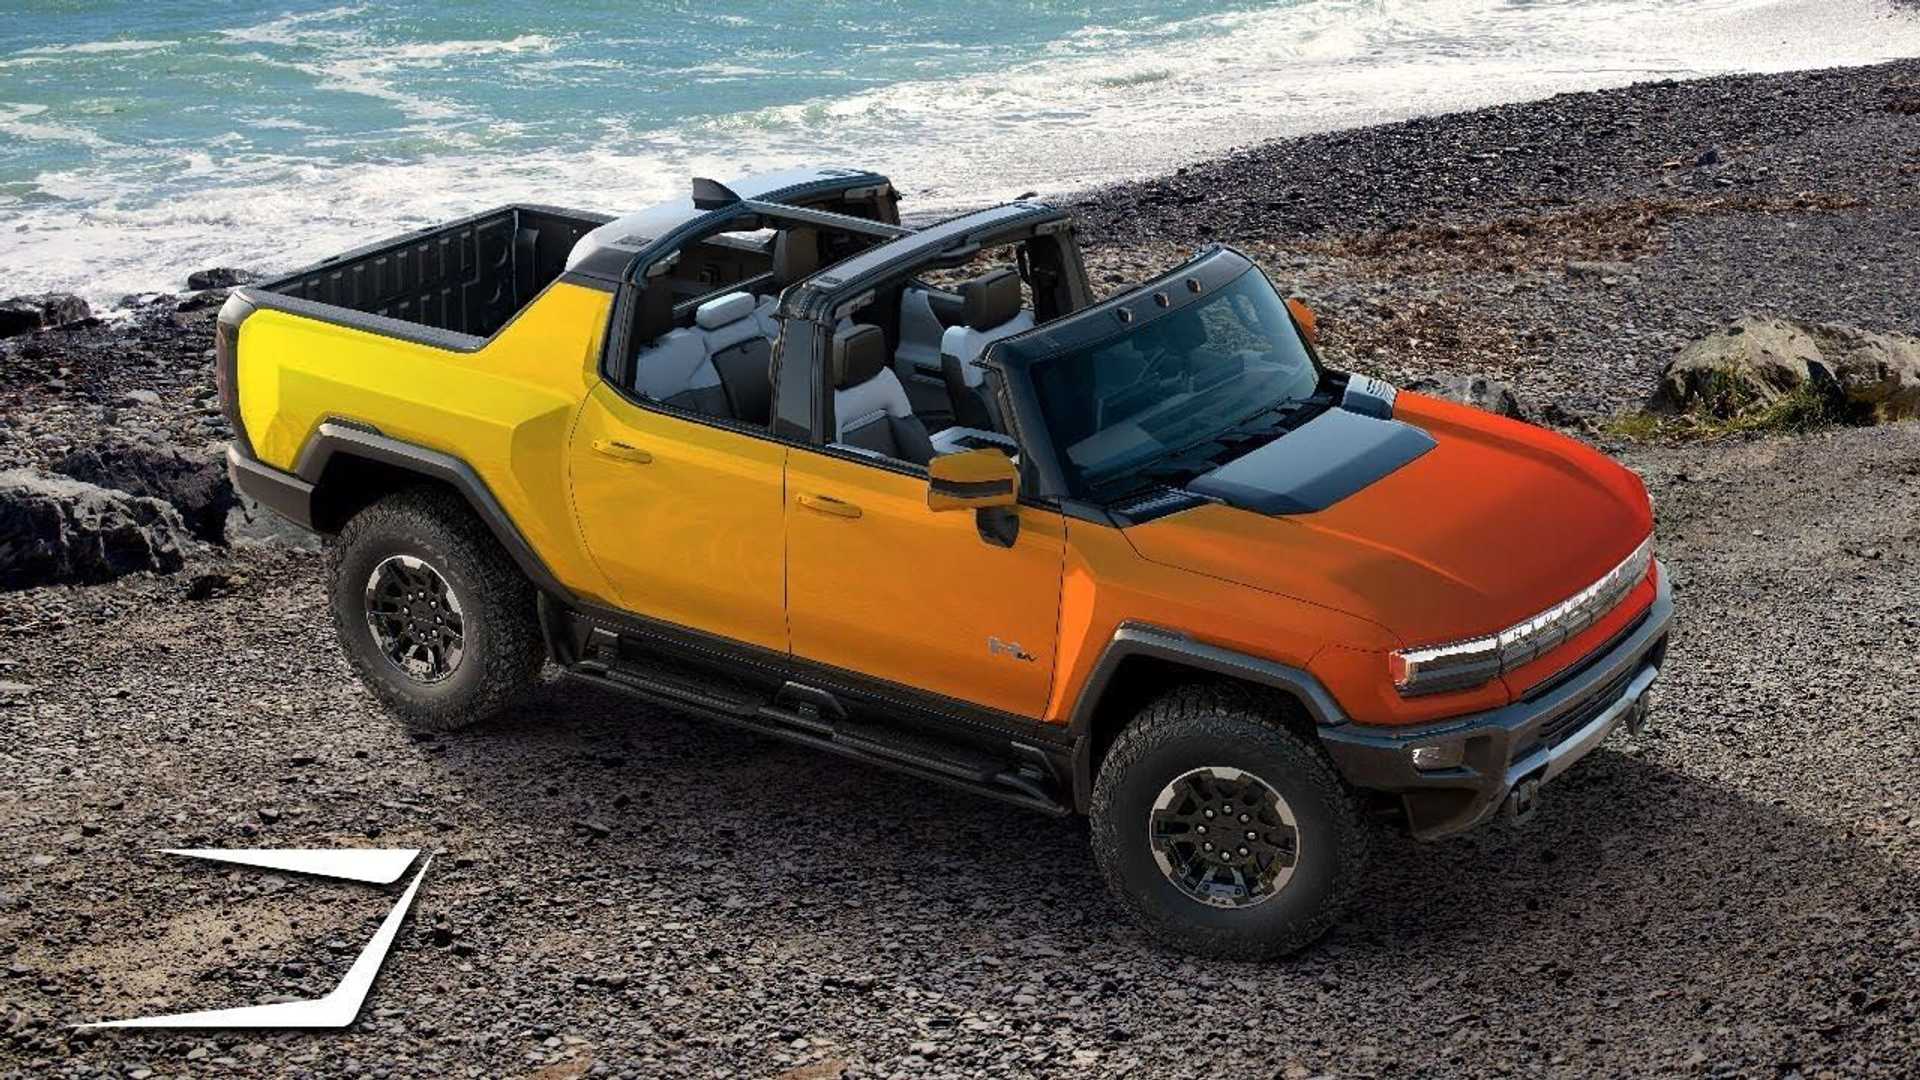 GMC Hummer Electric Pickup Truck Rendered In New Colors